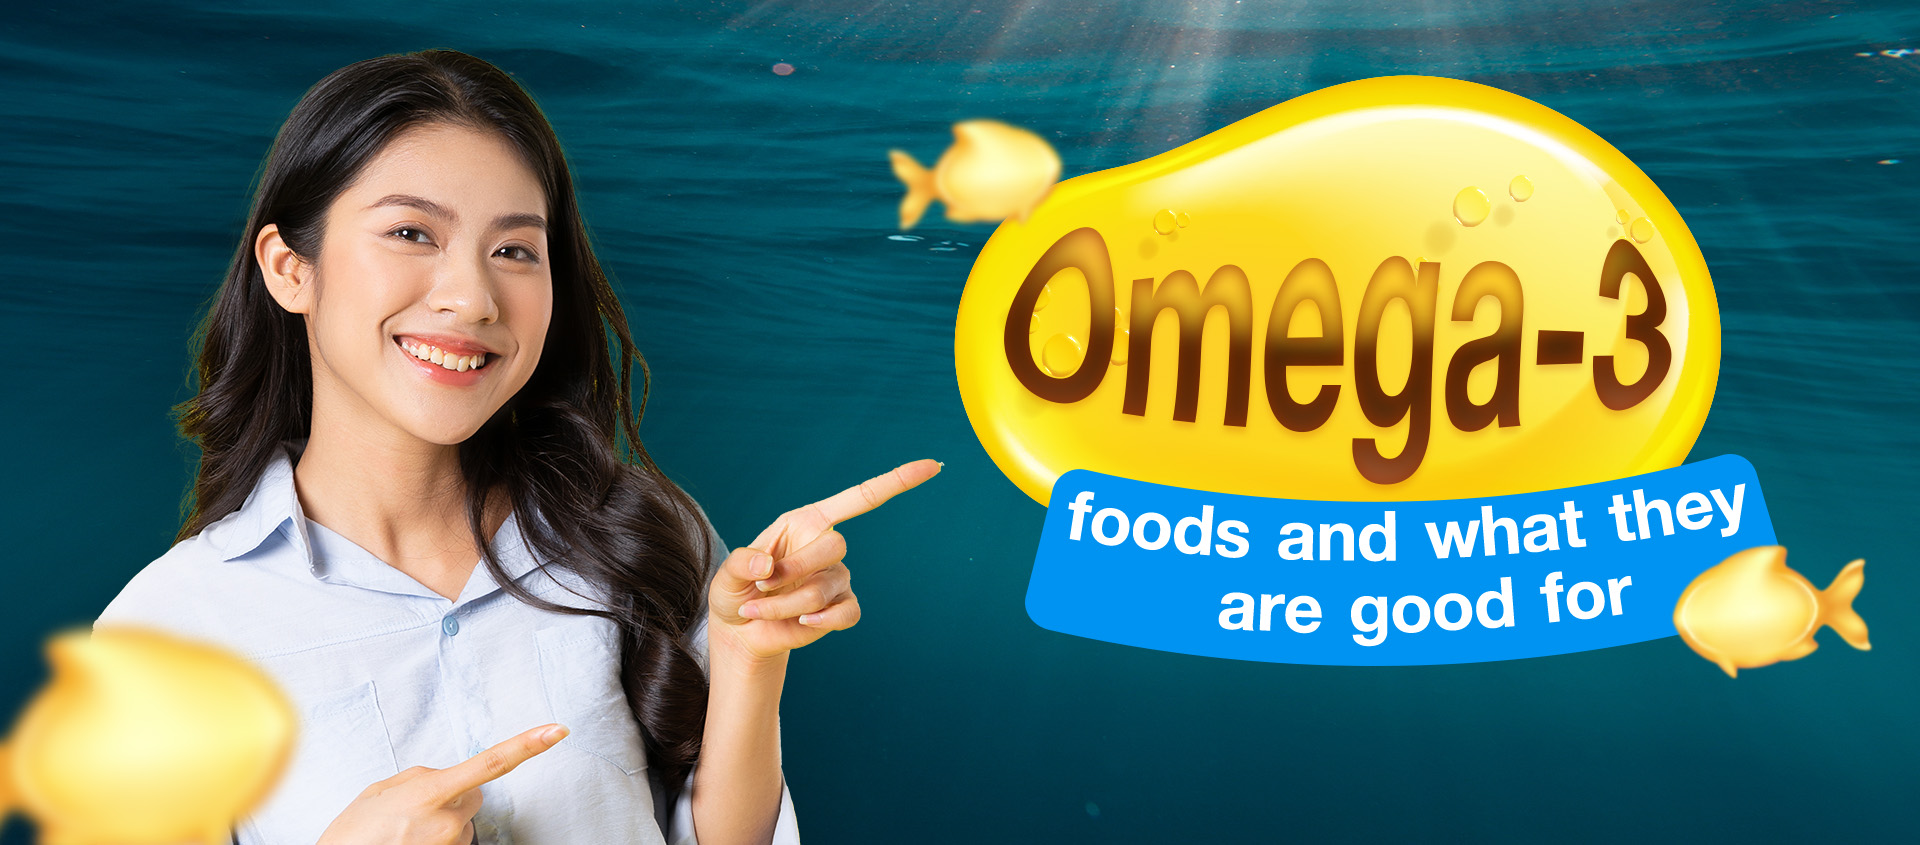 Omega-3 foods and what they are good for